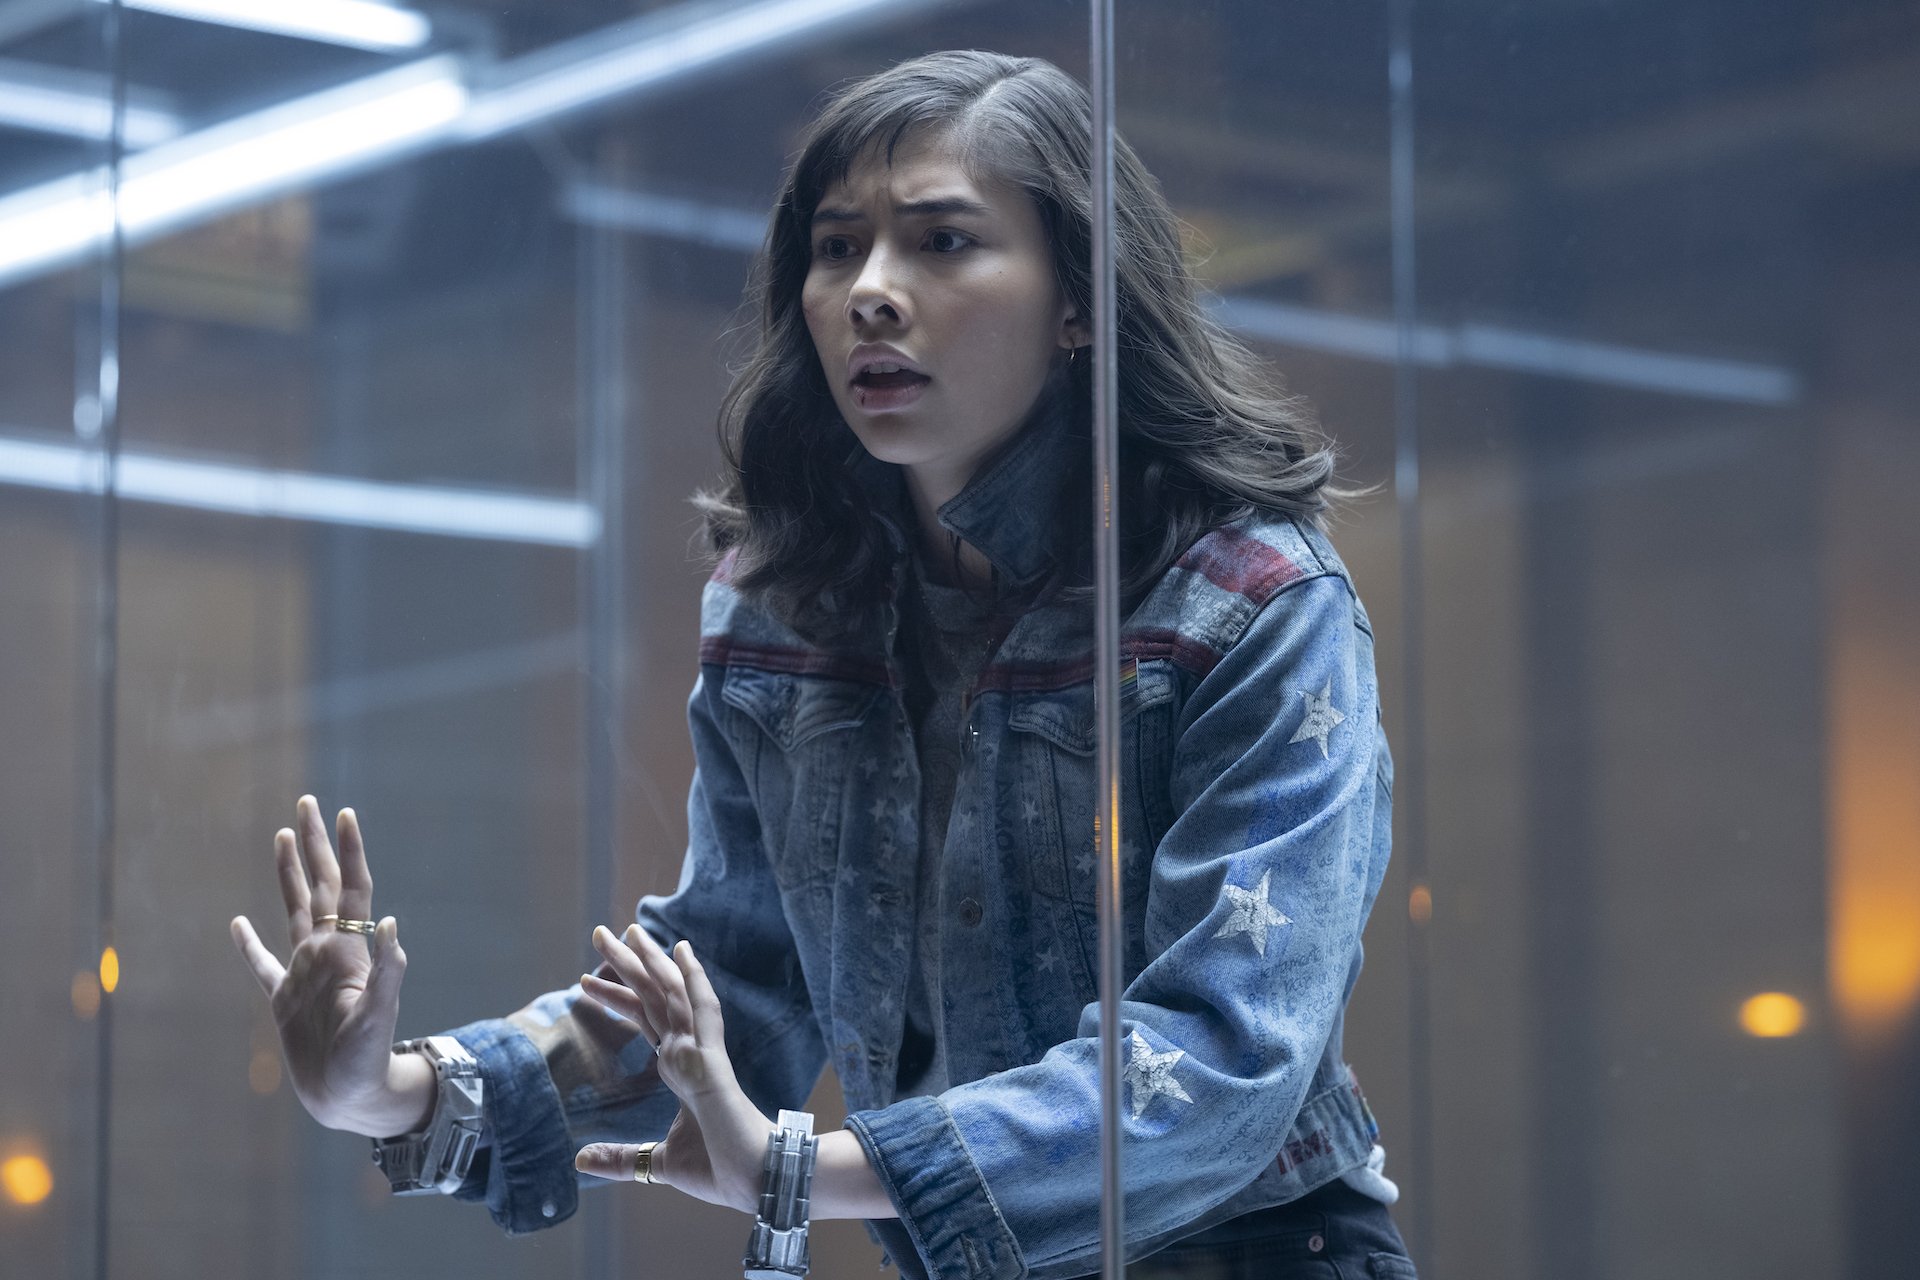 A young girl in a denim jacket trapped in a glass cage.